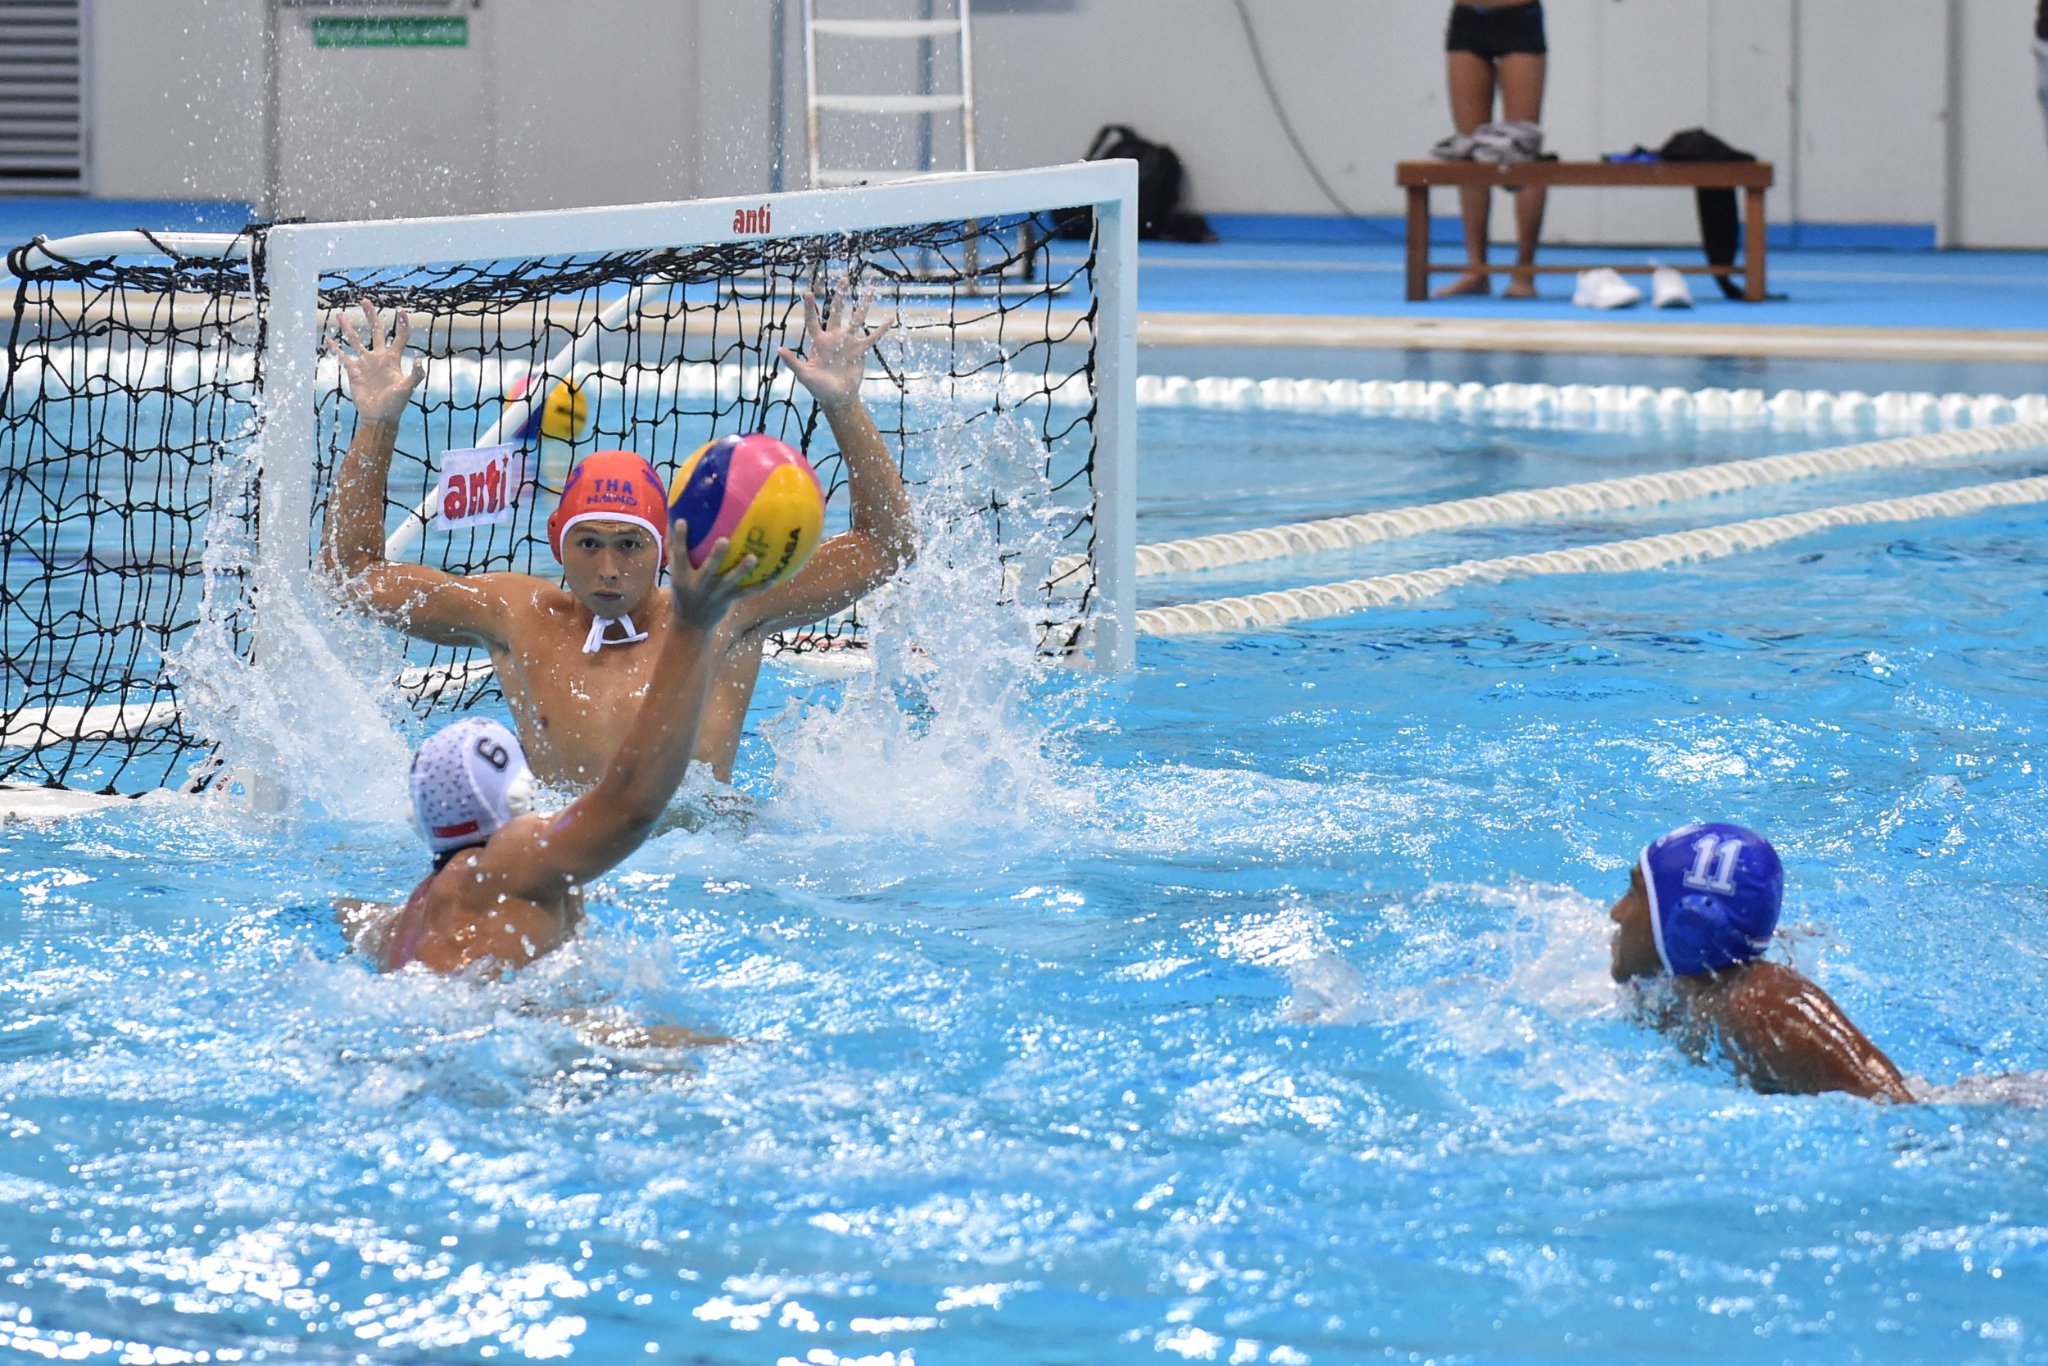 TeamSG's Quest for SEA Games Gold, Begins with Upcoming Asian Water Polo Championships!